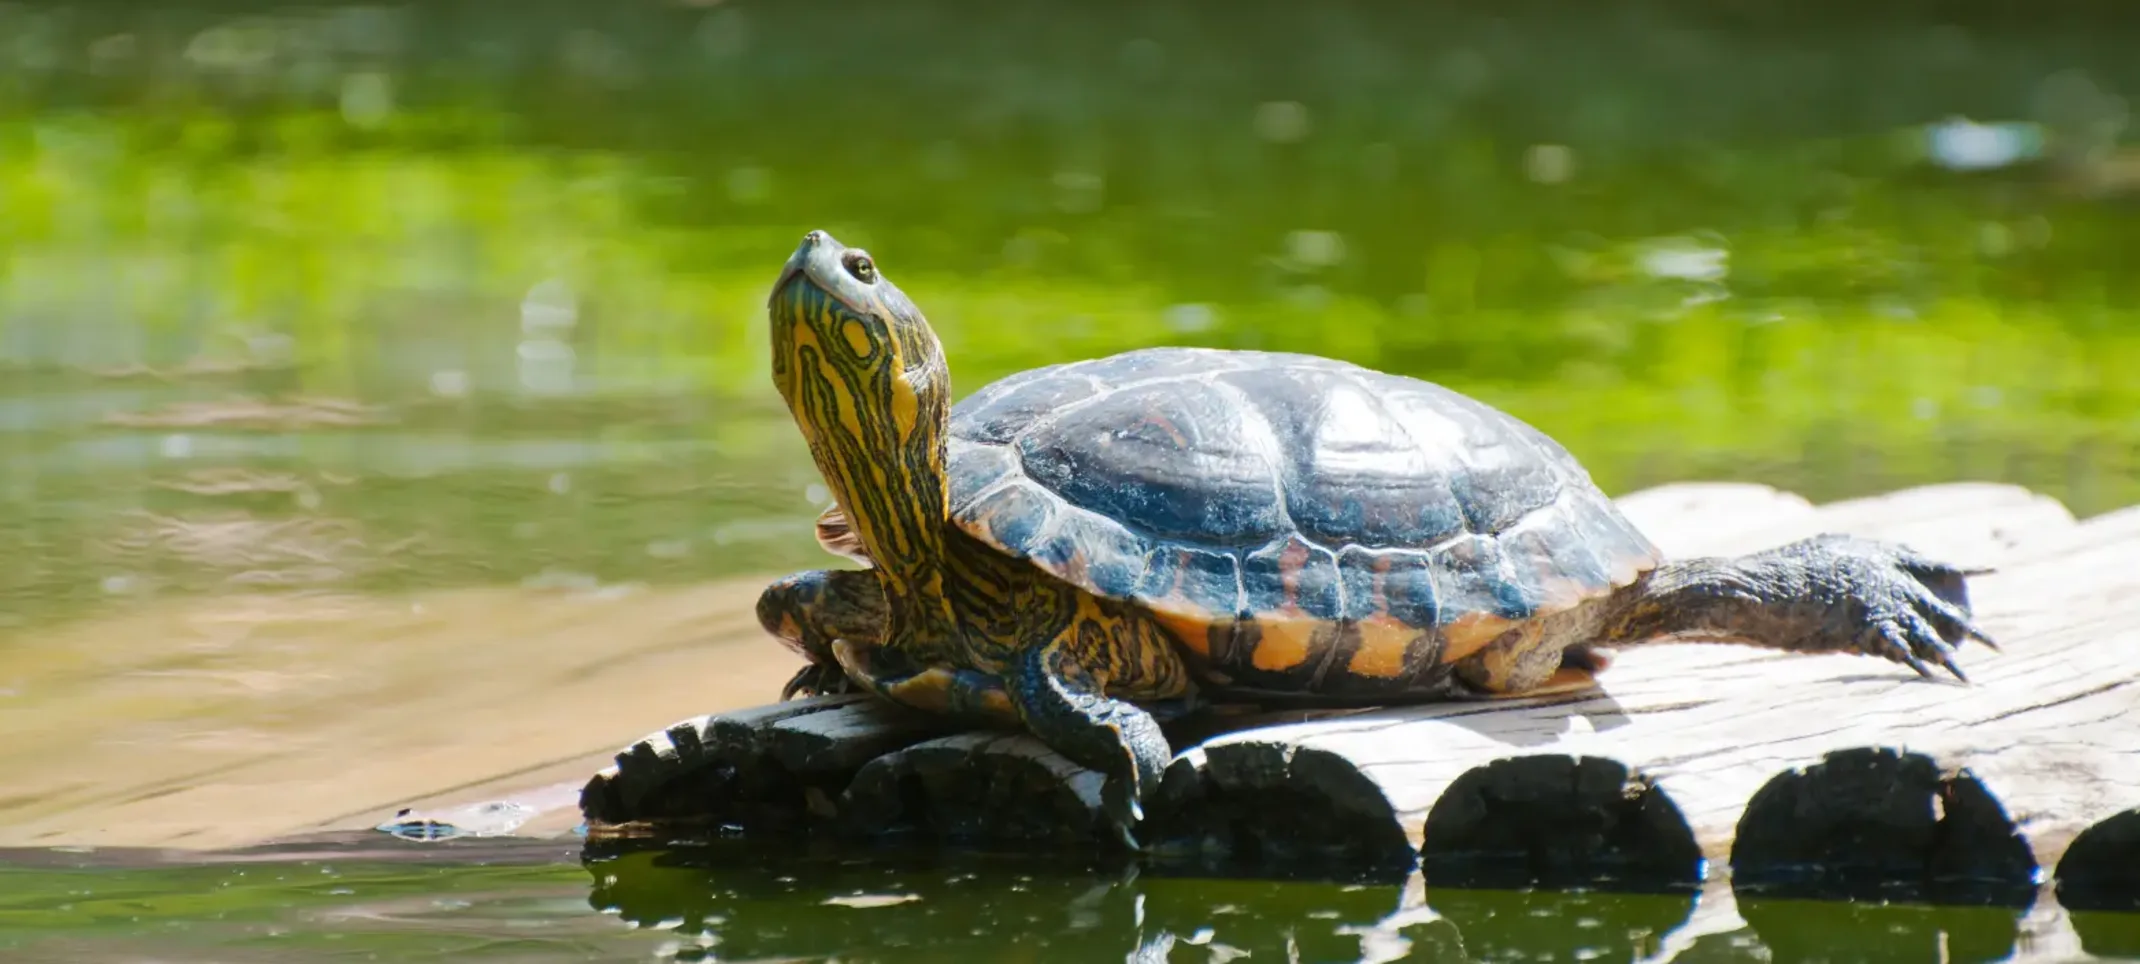 Turtle sunning on logs floating in the water